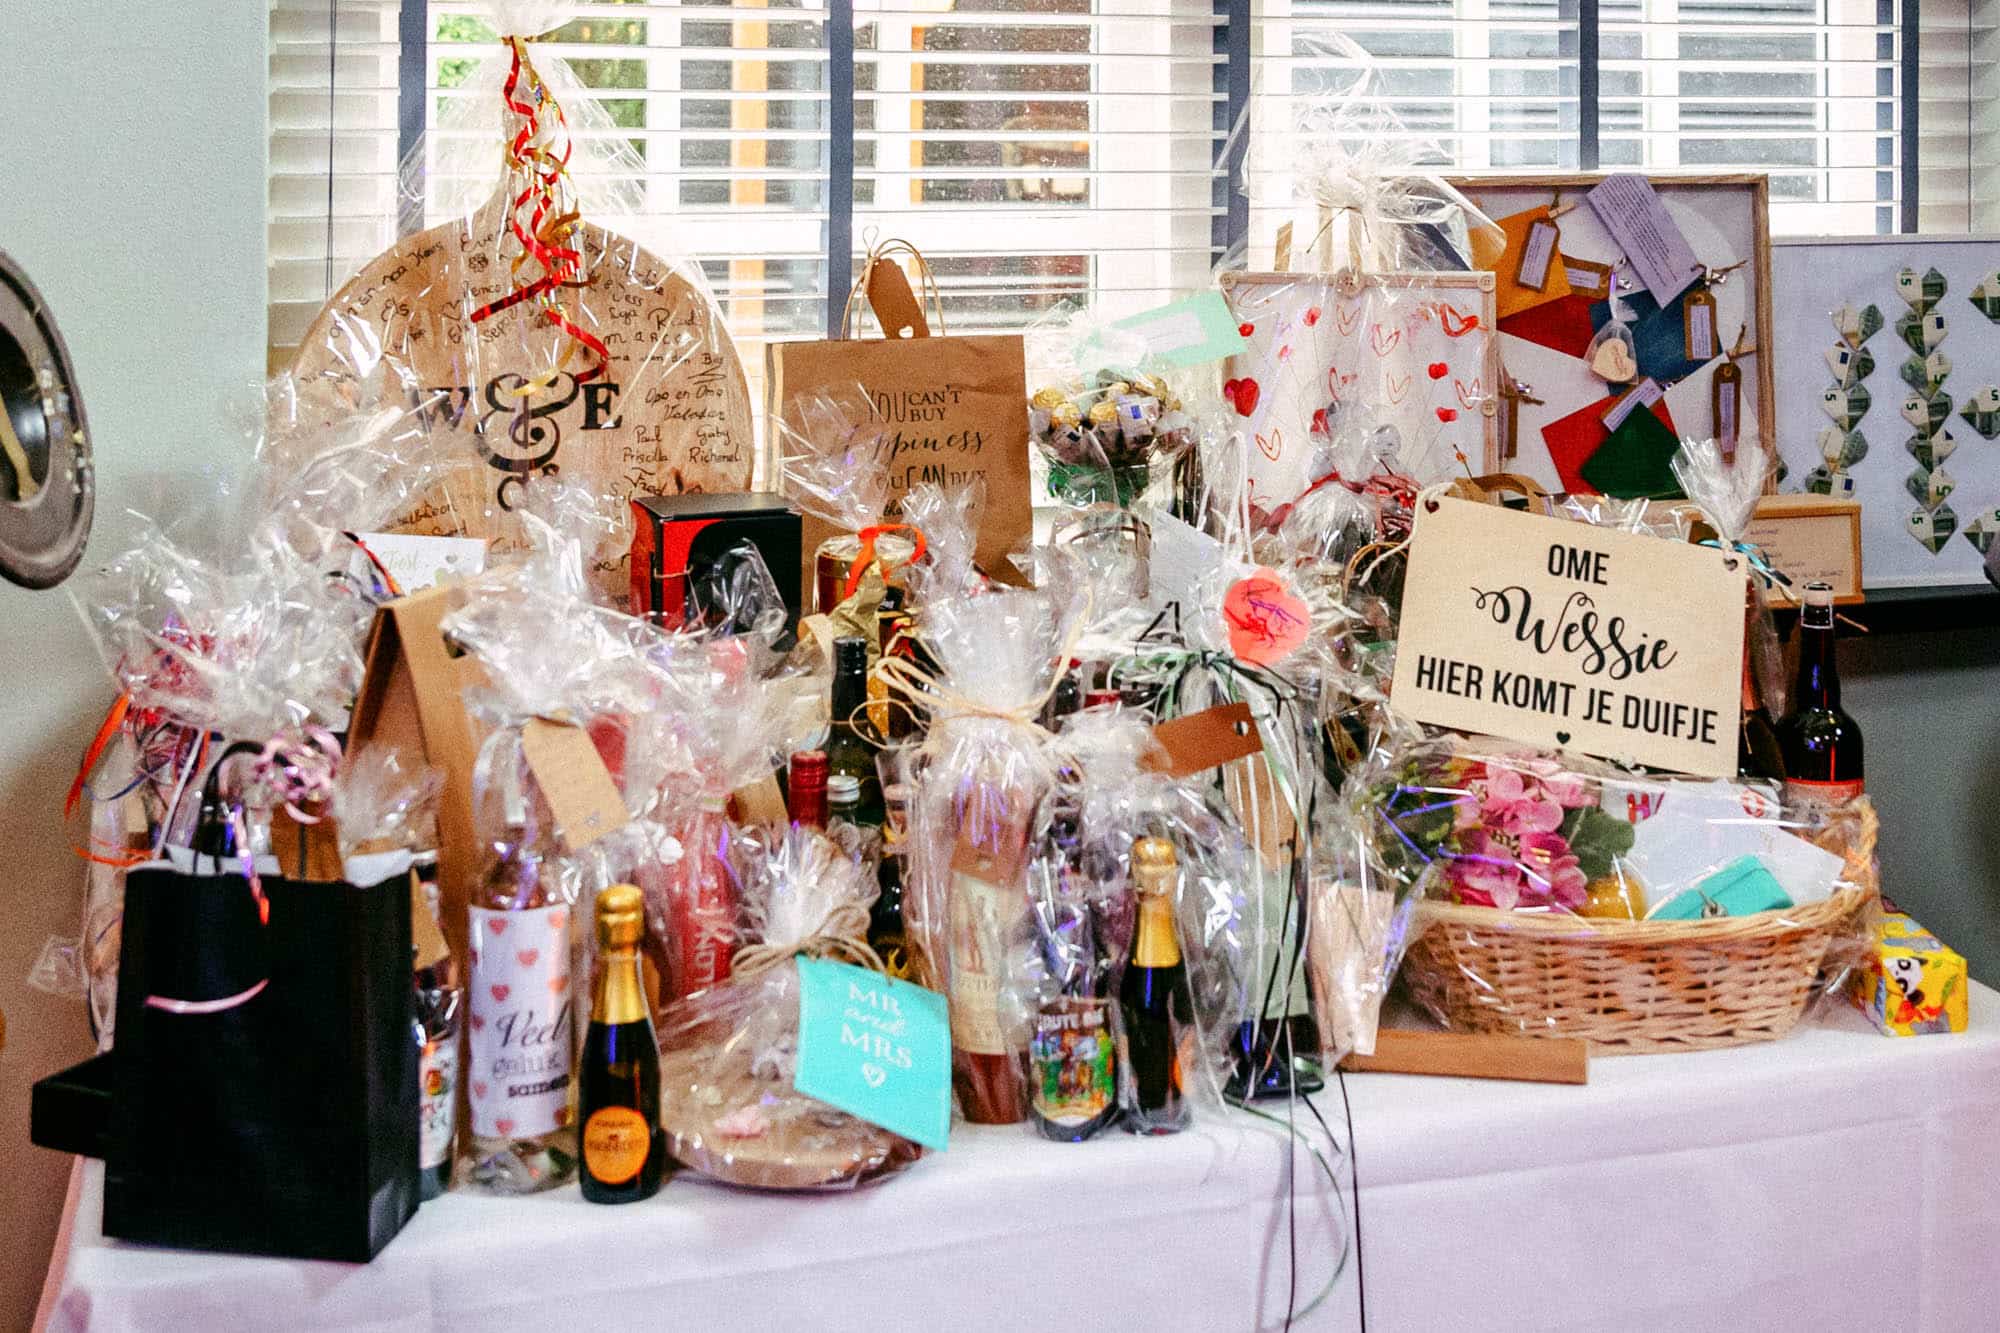 A table with a lot of gift bags on it, containing various items for a wedding party.